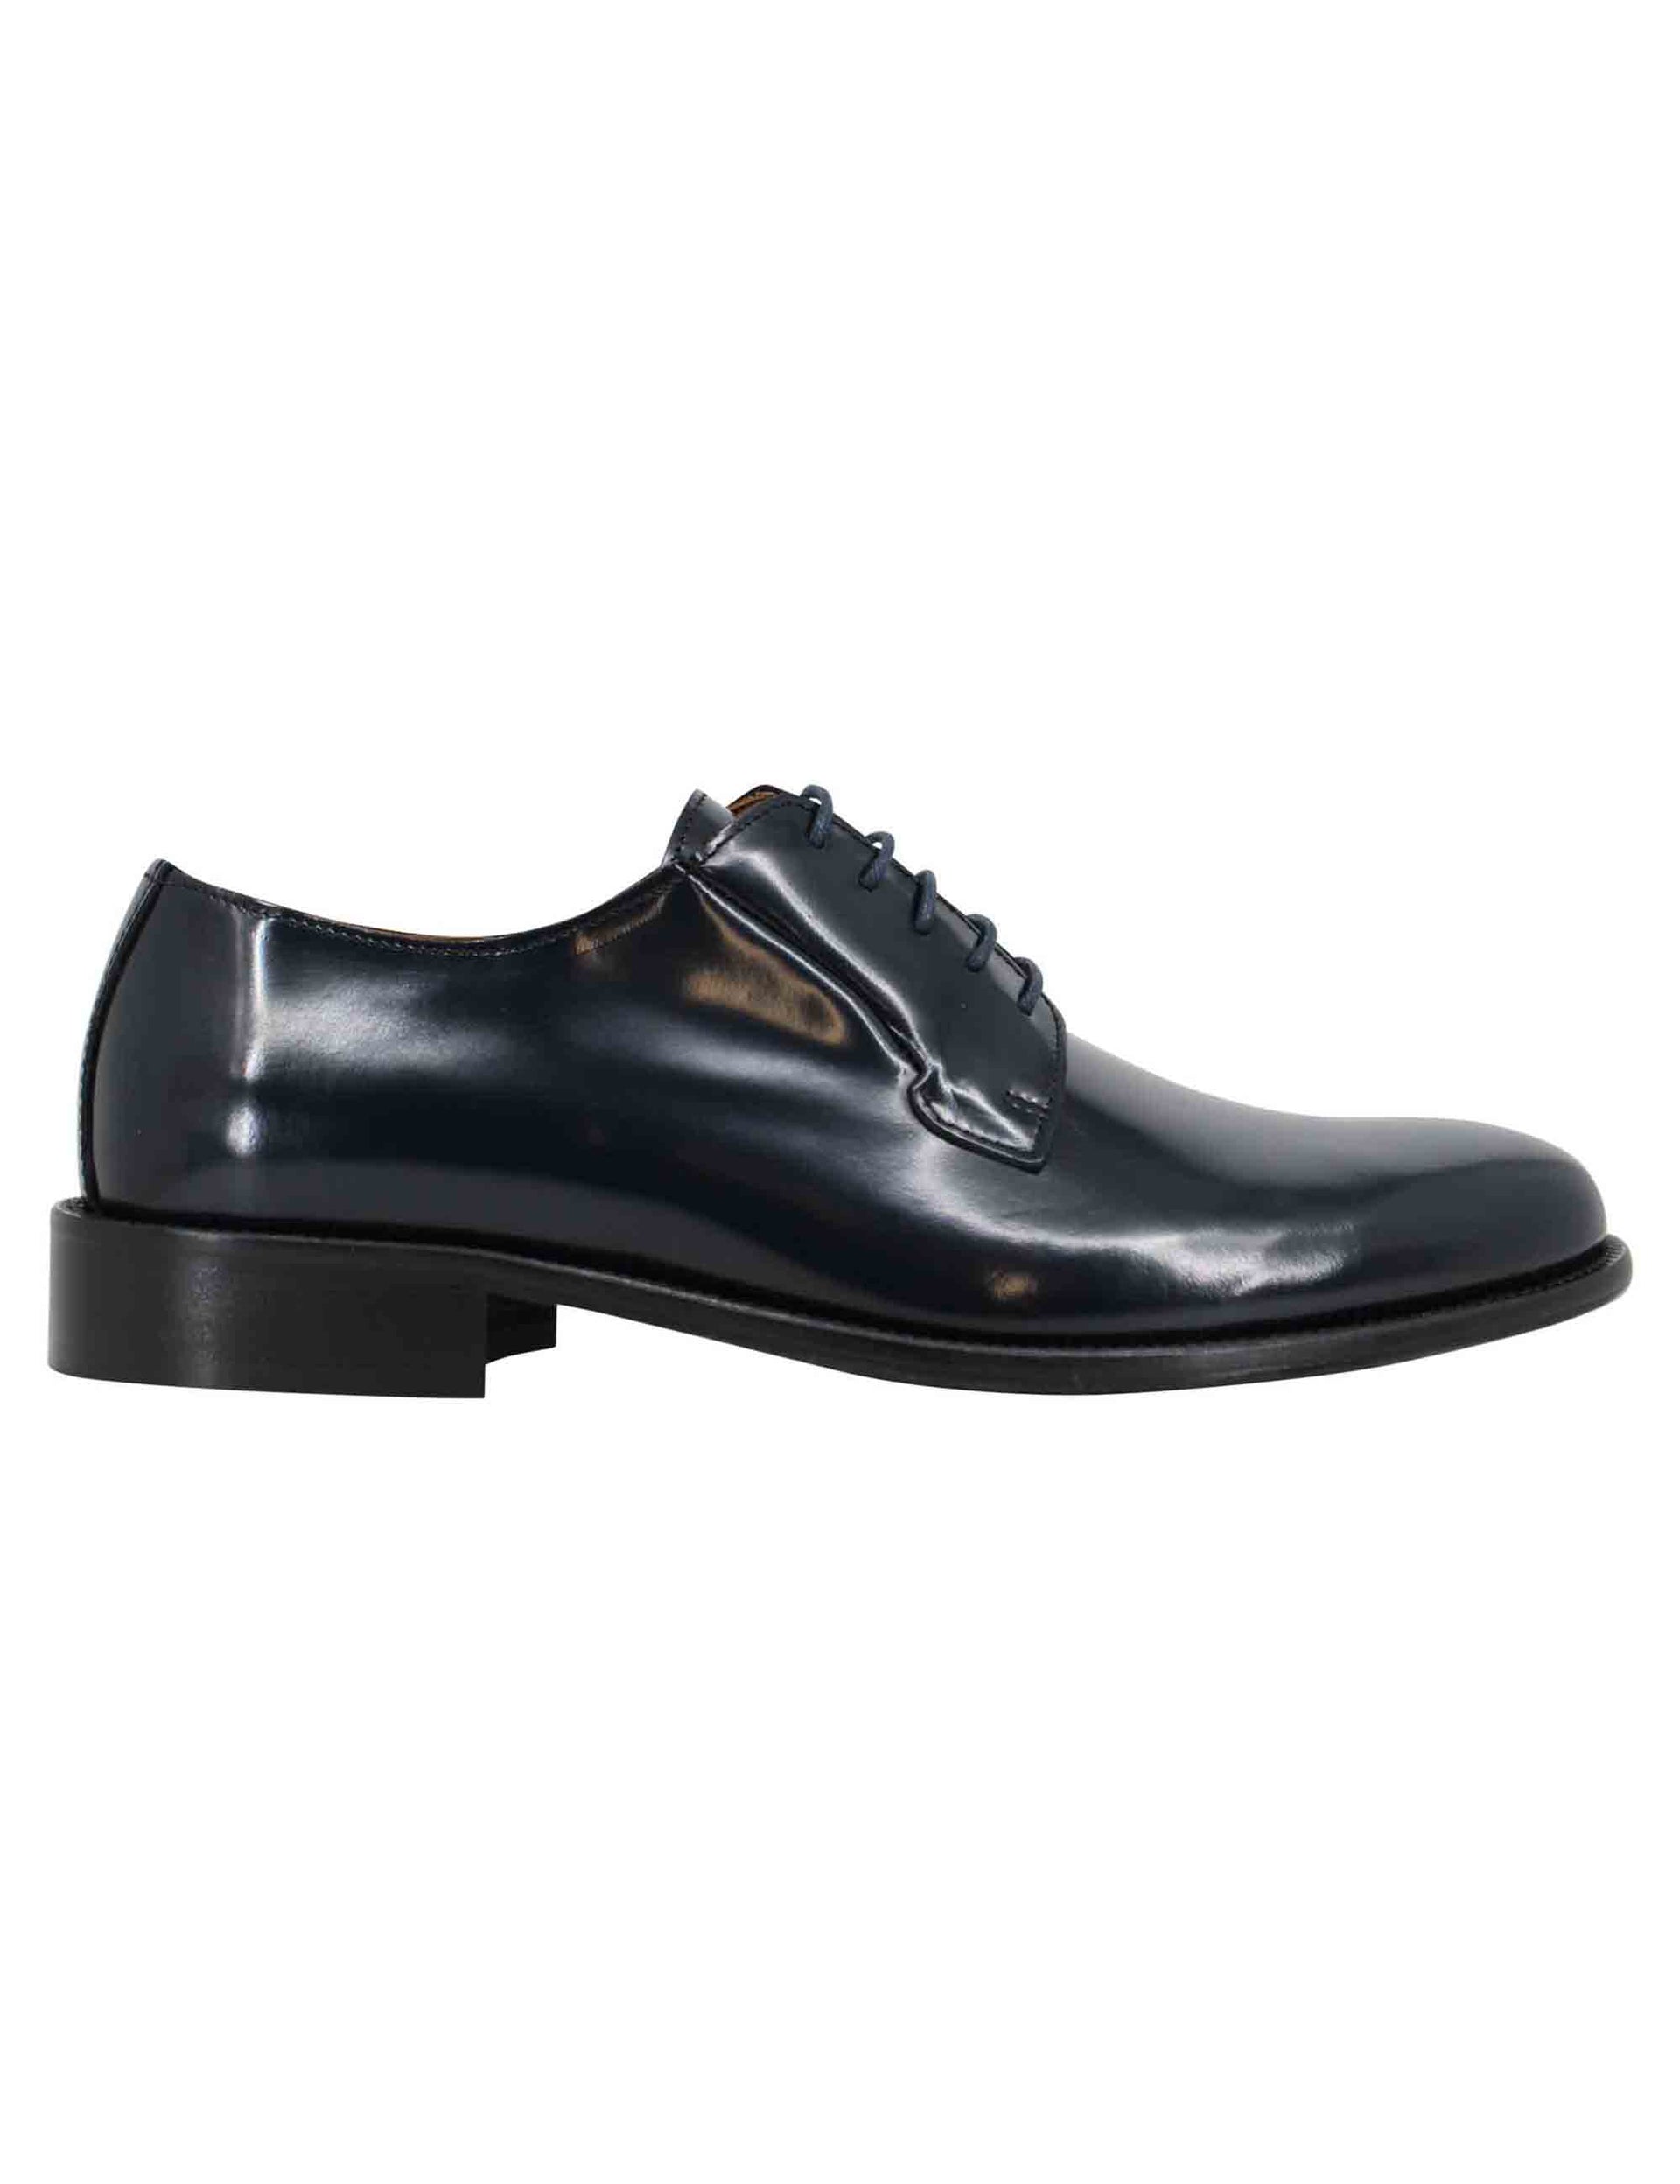 Men's lace-ups in blue shiny leather with stitched leather sole